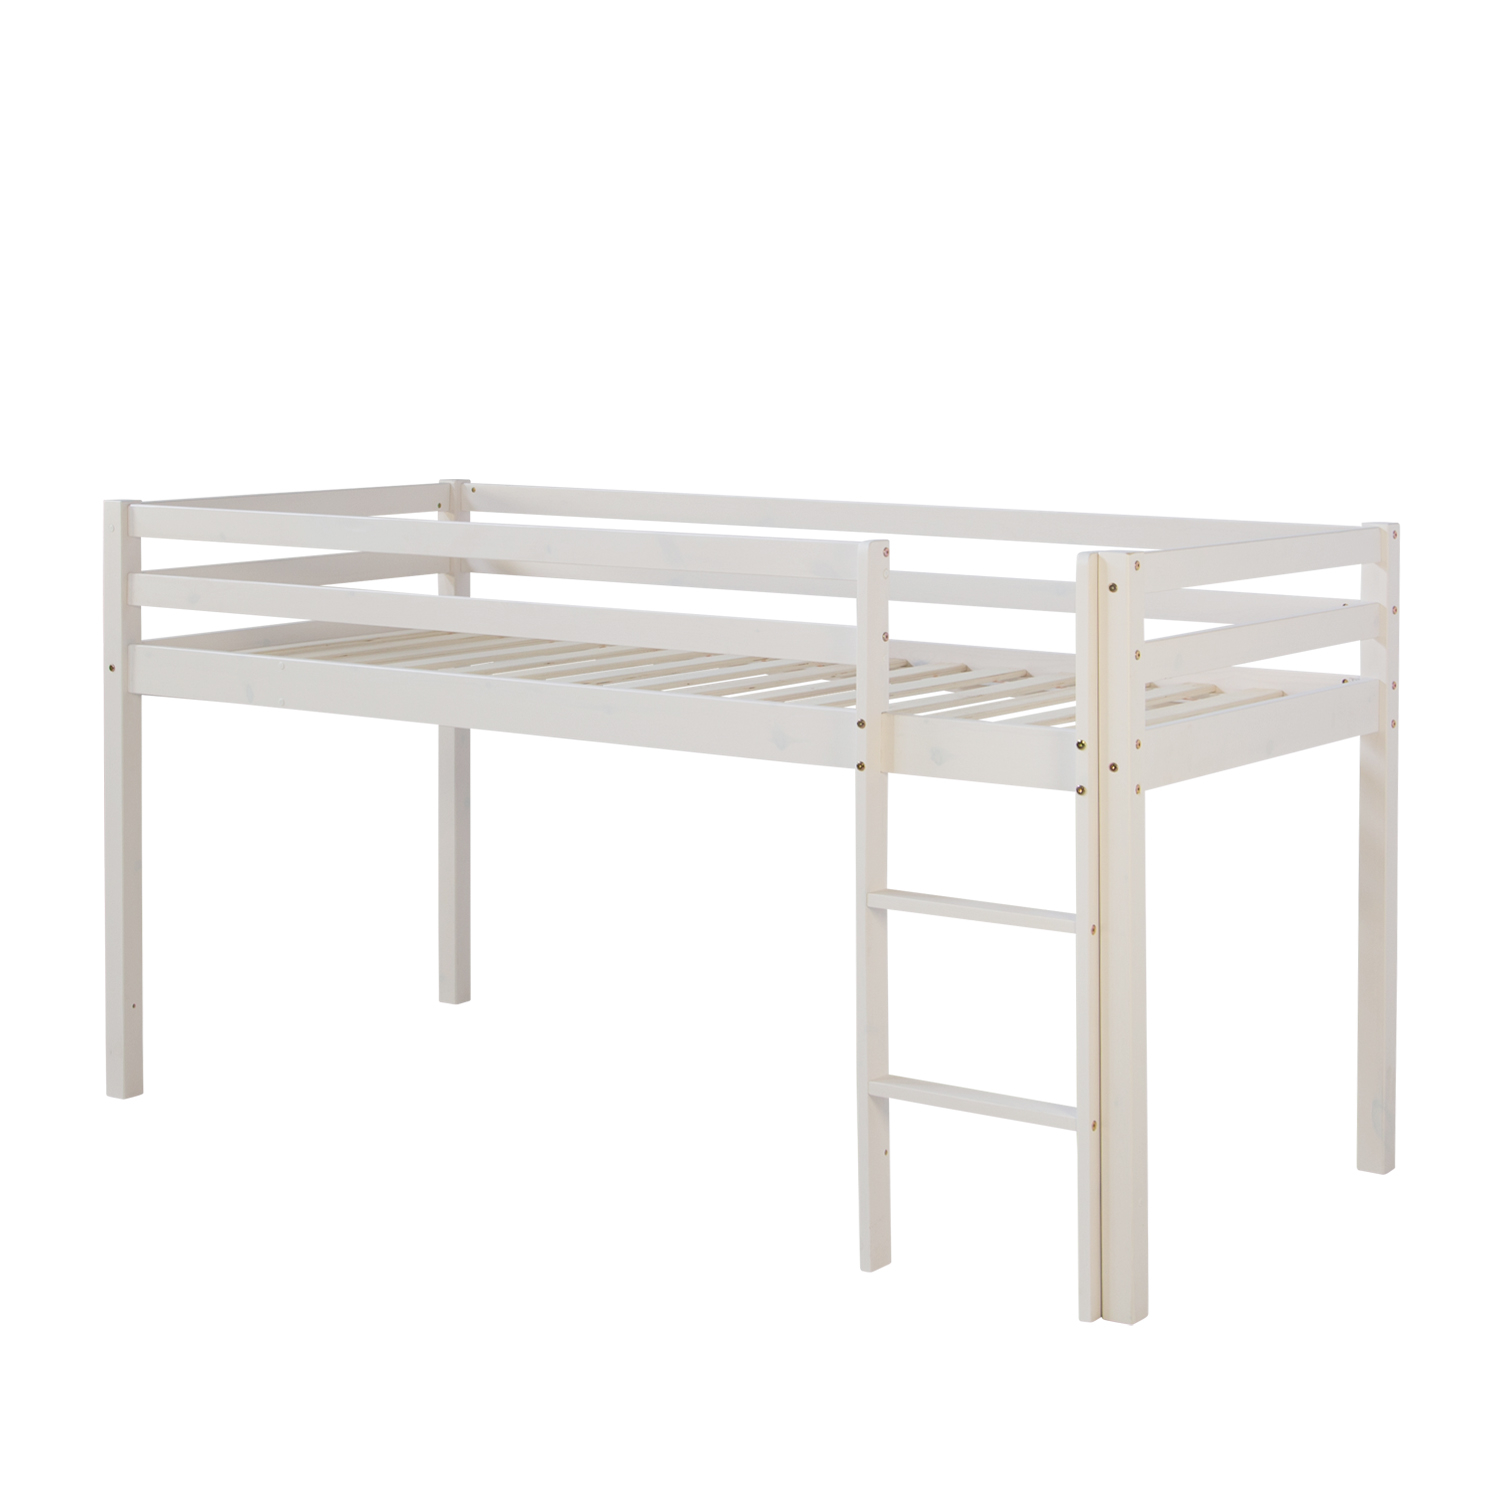 Cabin Bunk Bed High sleeper Bed white Pine